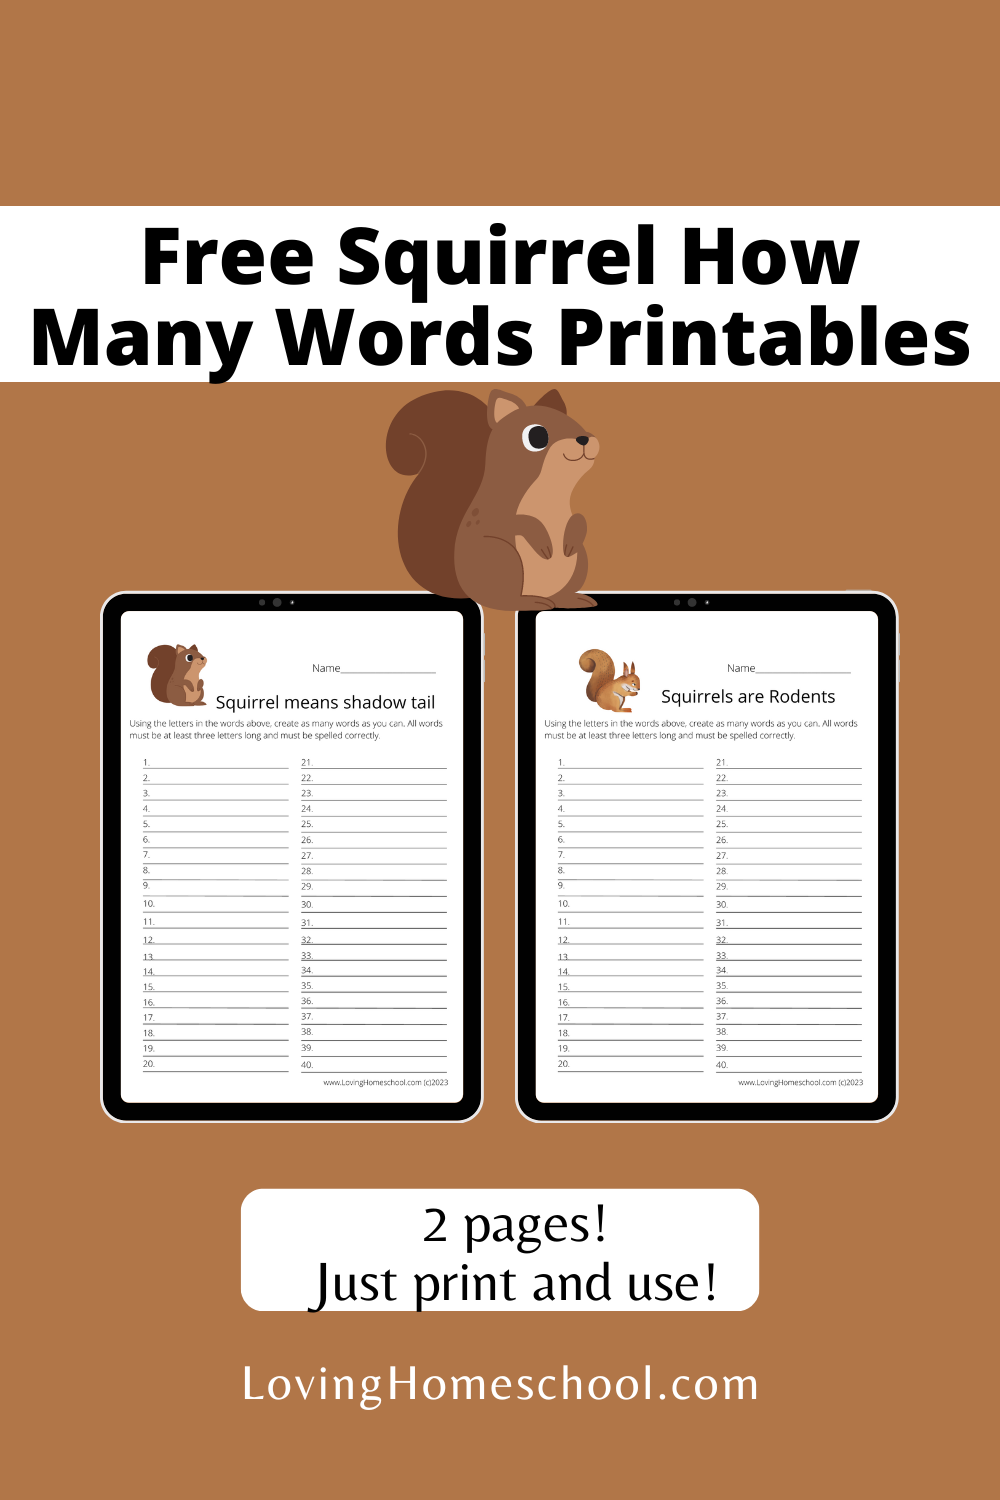 Free Squirrel How Many Words Printables Pinterest Pin